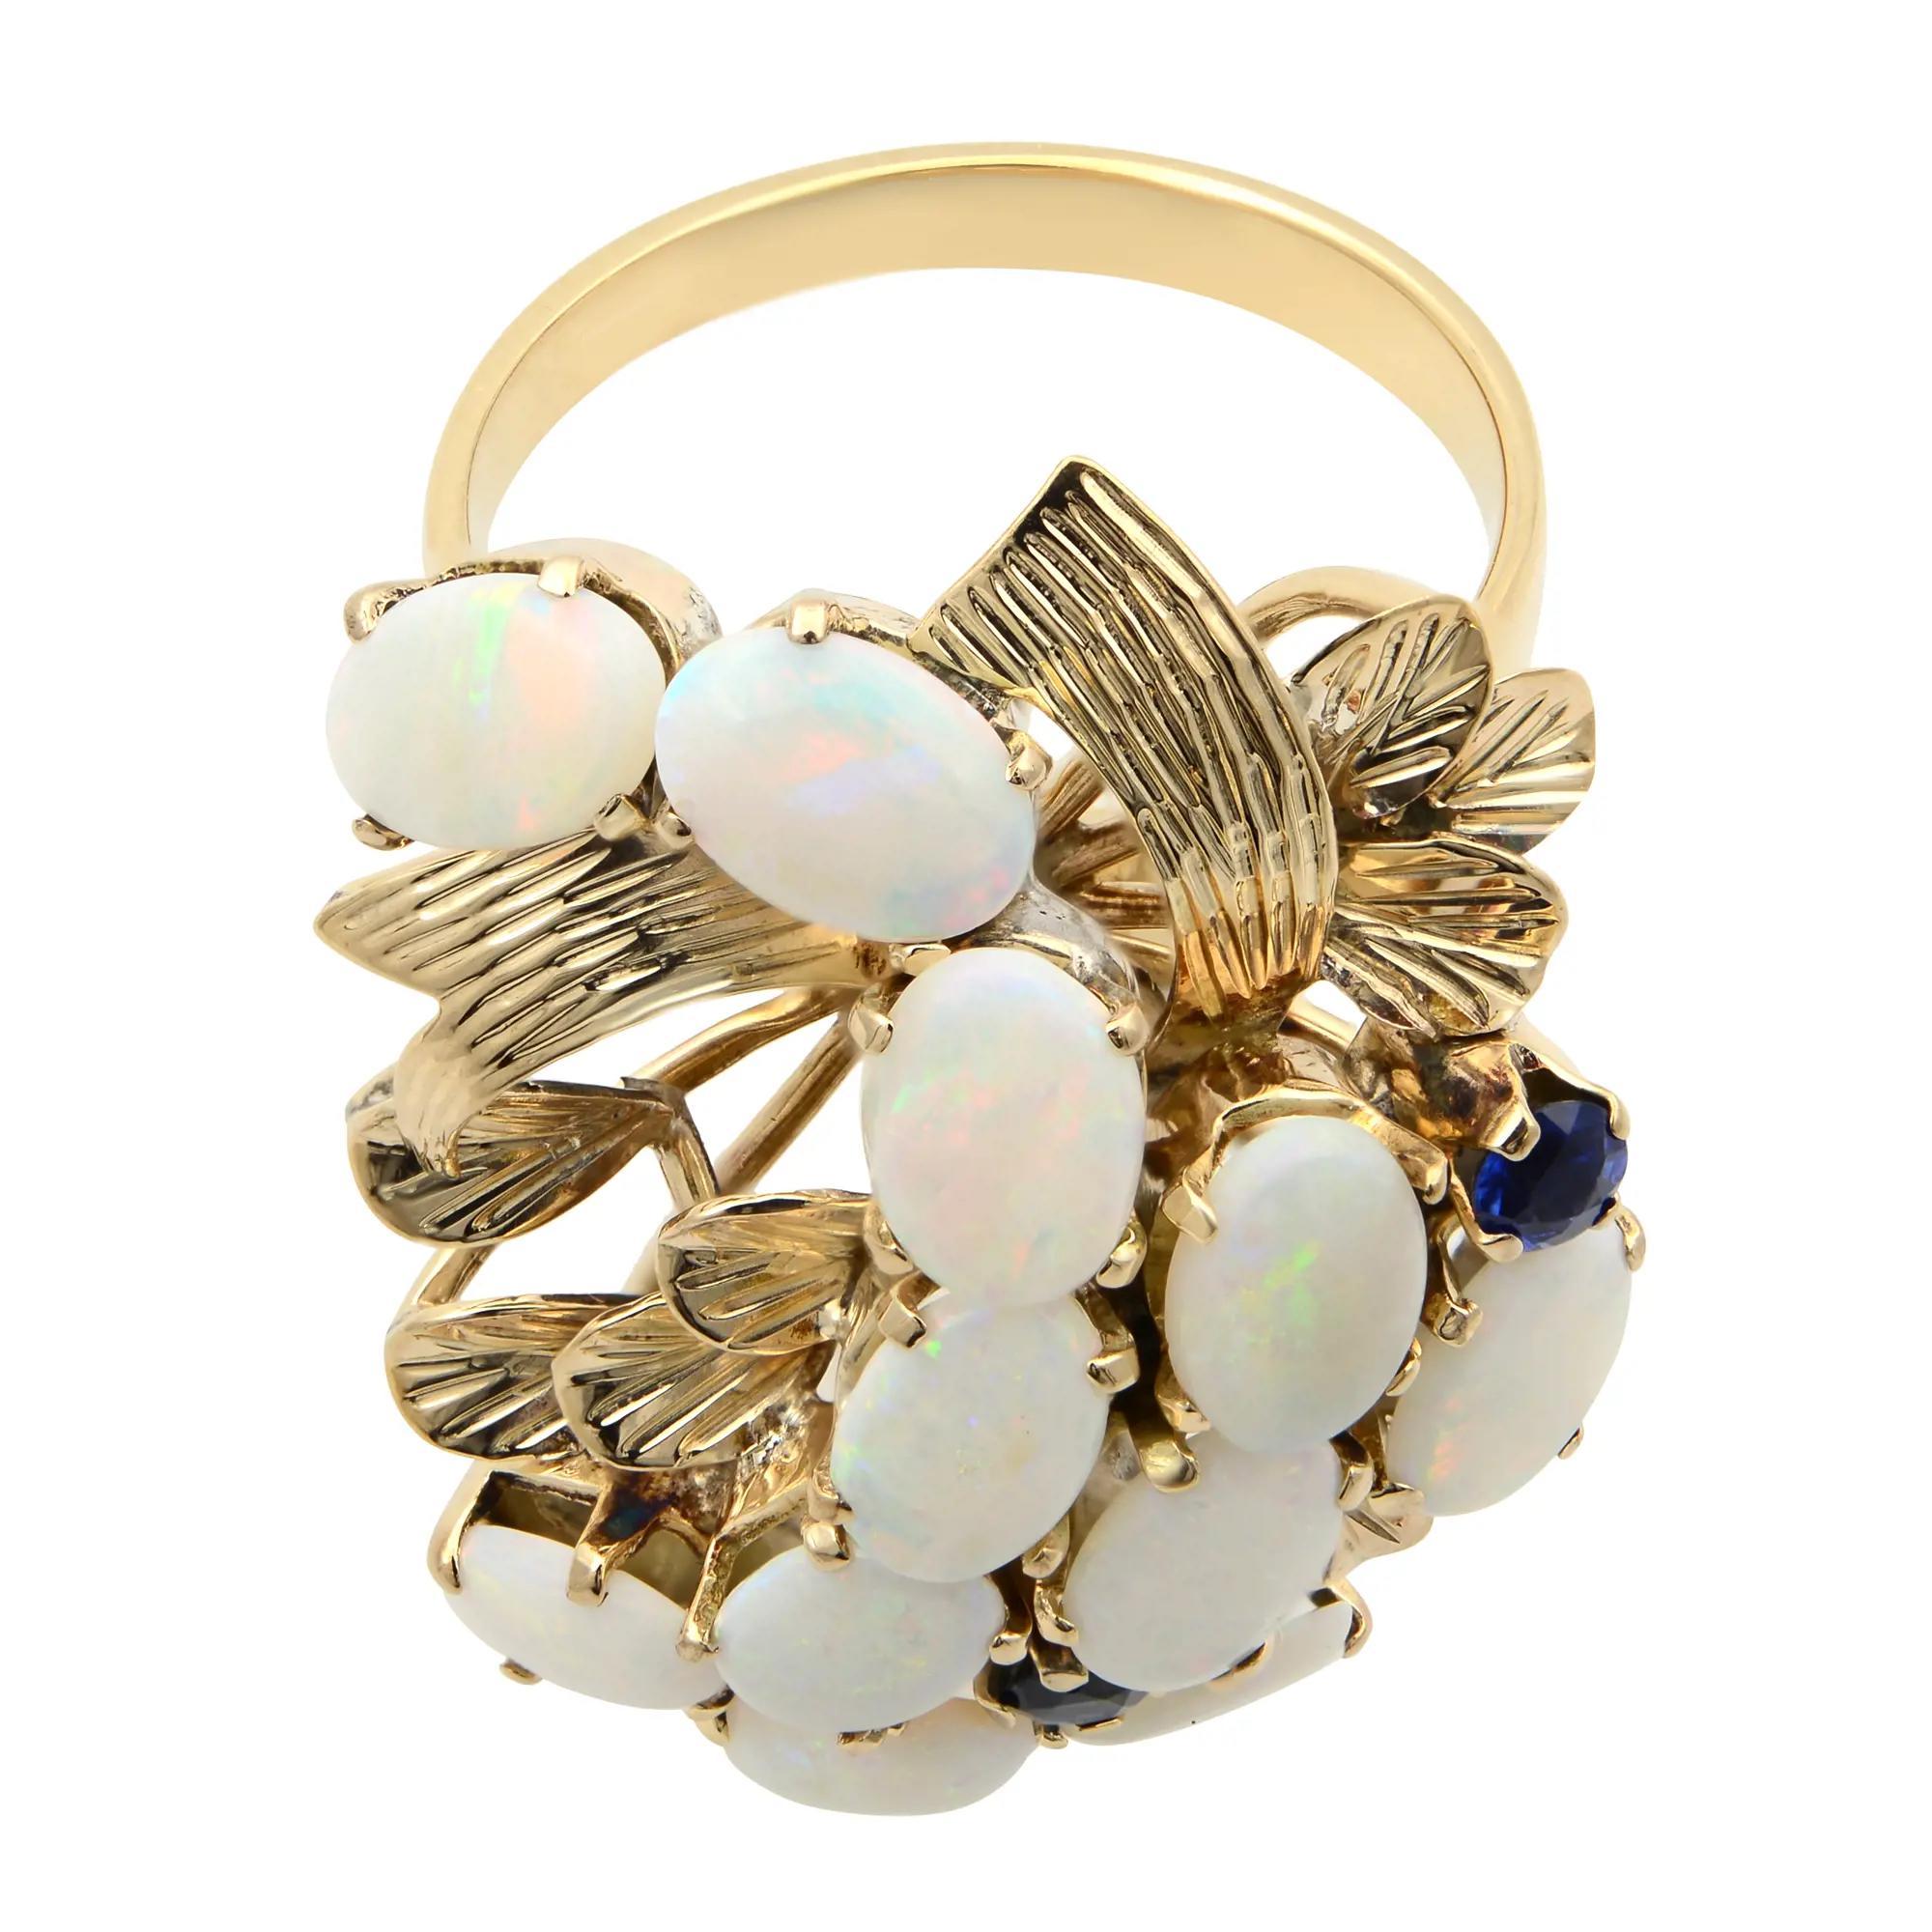 This stunning estate cocktail ring comes with a flashy statement look. A must have in your jewelry collection. The ring is crafted in 14K yellow gold. Features 11 prong set oval shaped white Opal and 2 round cut blue Sapphires. Ring size 7. Total